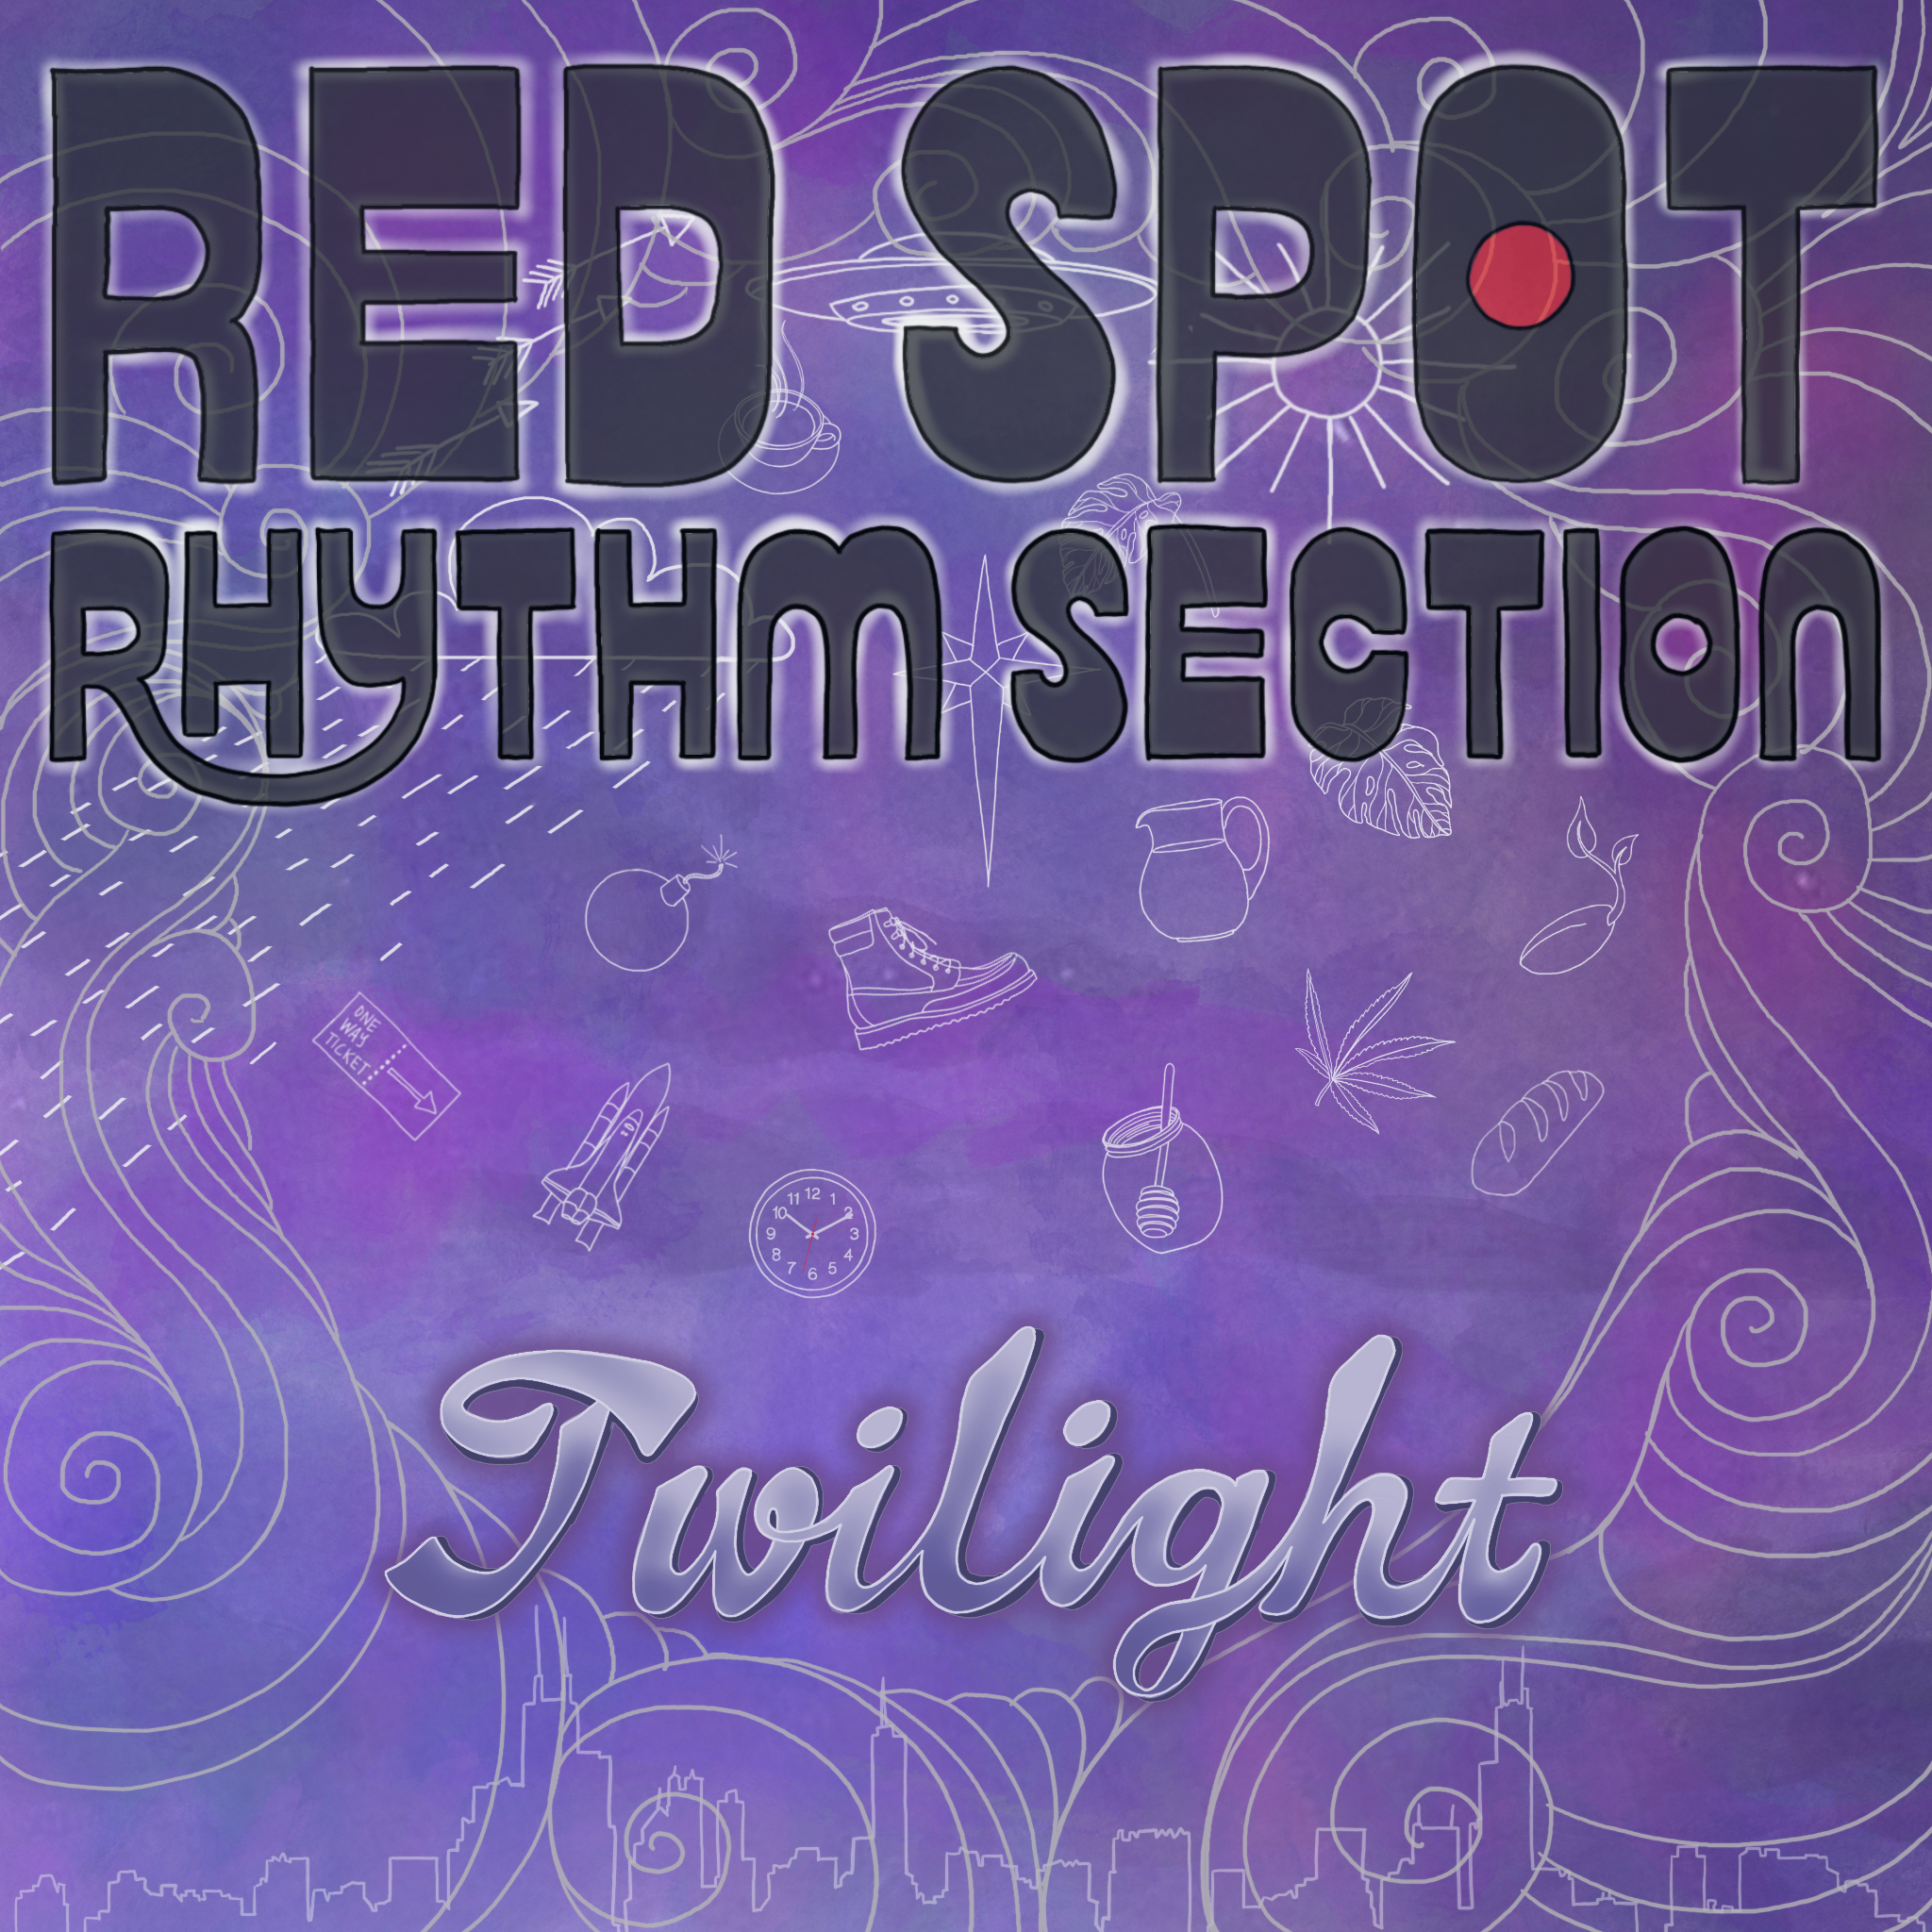 Single Premiere: Red Spot Rhythm Section “Look Up”